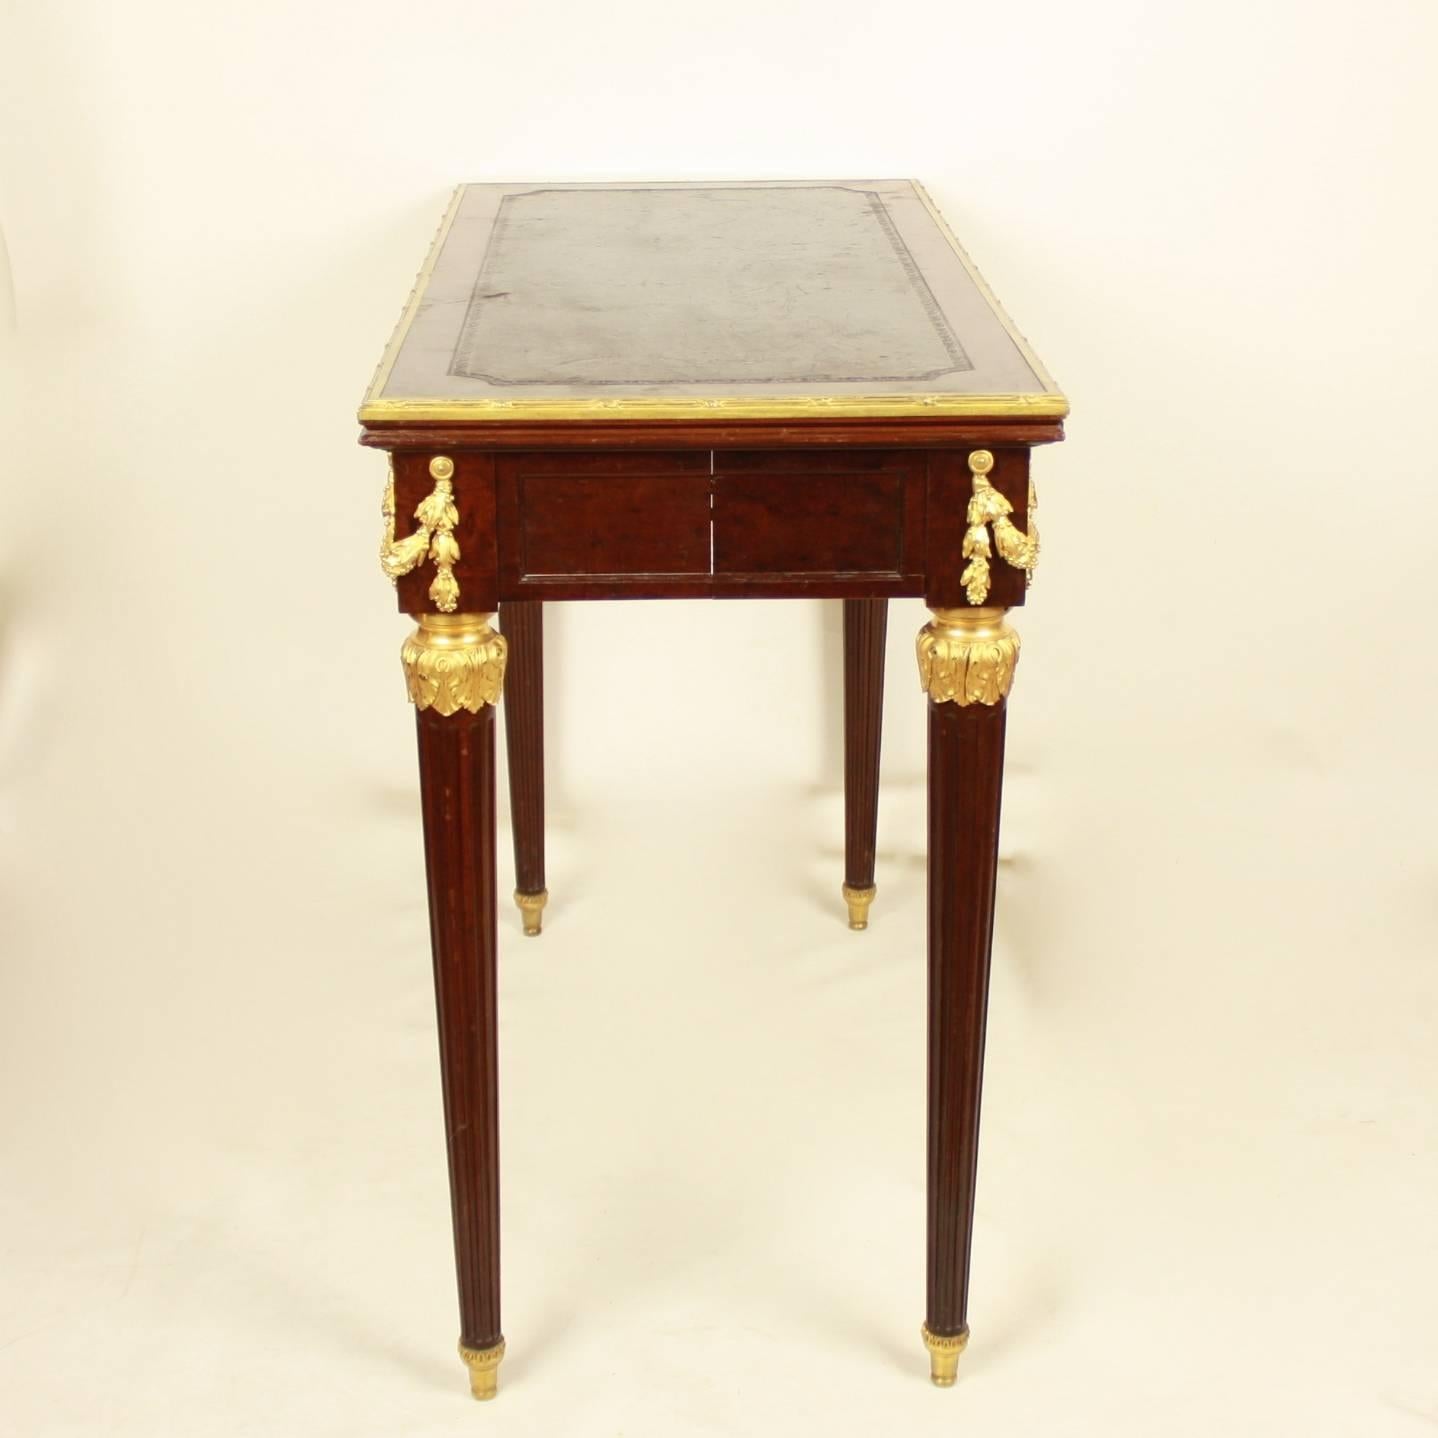 A 19th century Louis XVI style extending game table made of acajou mouchete mahogany and adorned with high quality ormolu mounts. The game table hosts an interesting mechanism: the back legs can be pulled out by pressing a hidden wooden button